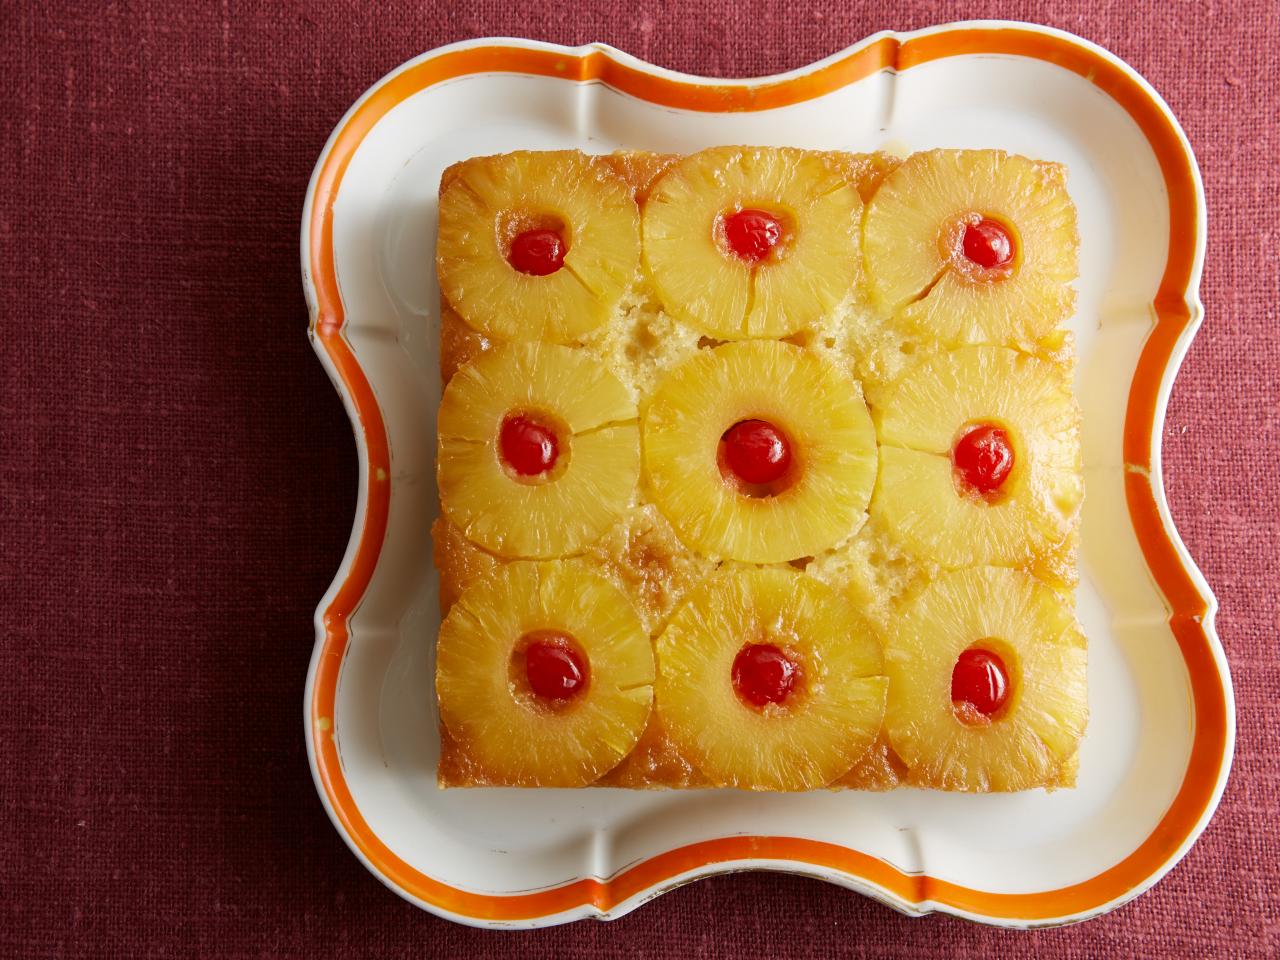 Paul Hollywood's Pineapple Upside-down Cakes - The Great British Bake Off |  The Great British Bake Off